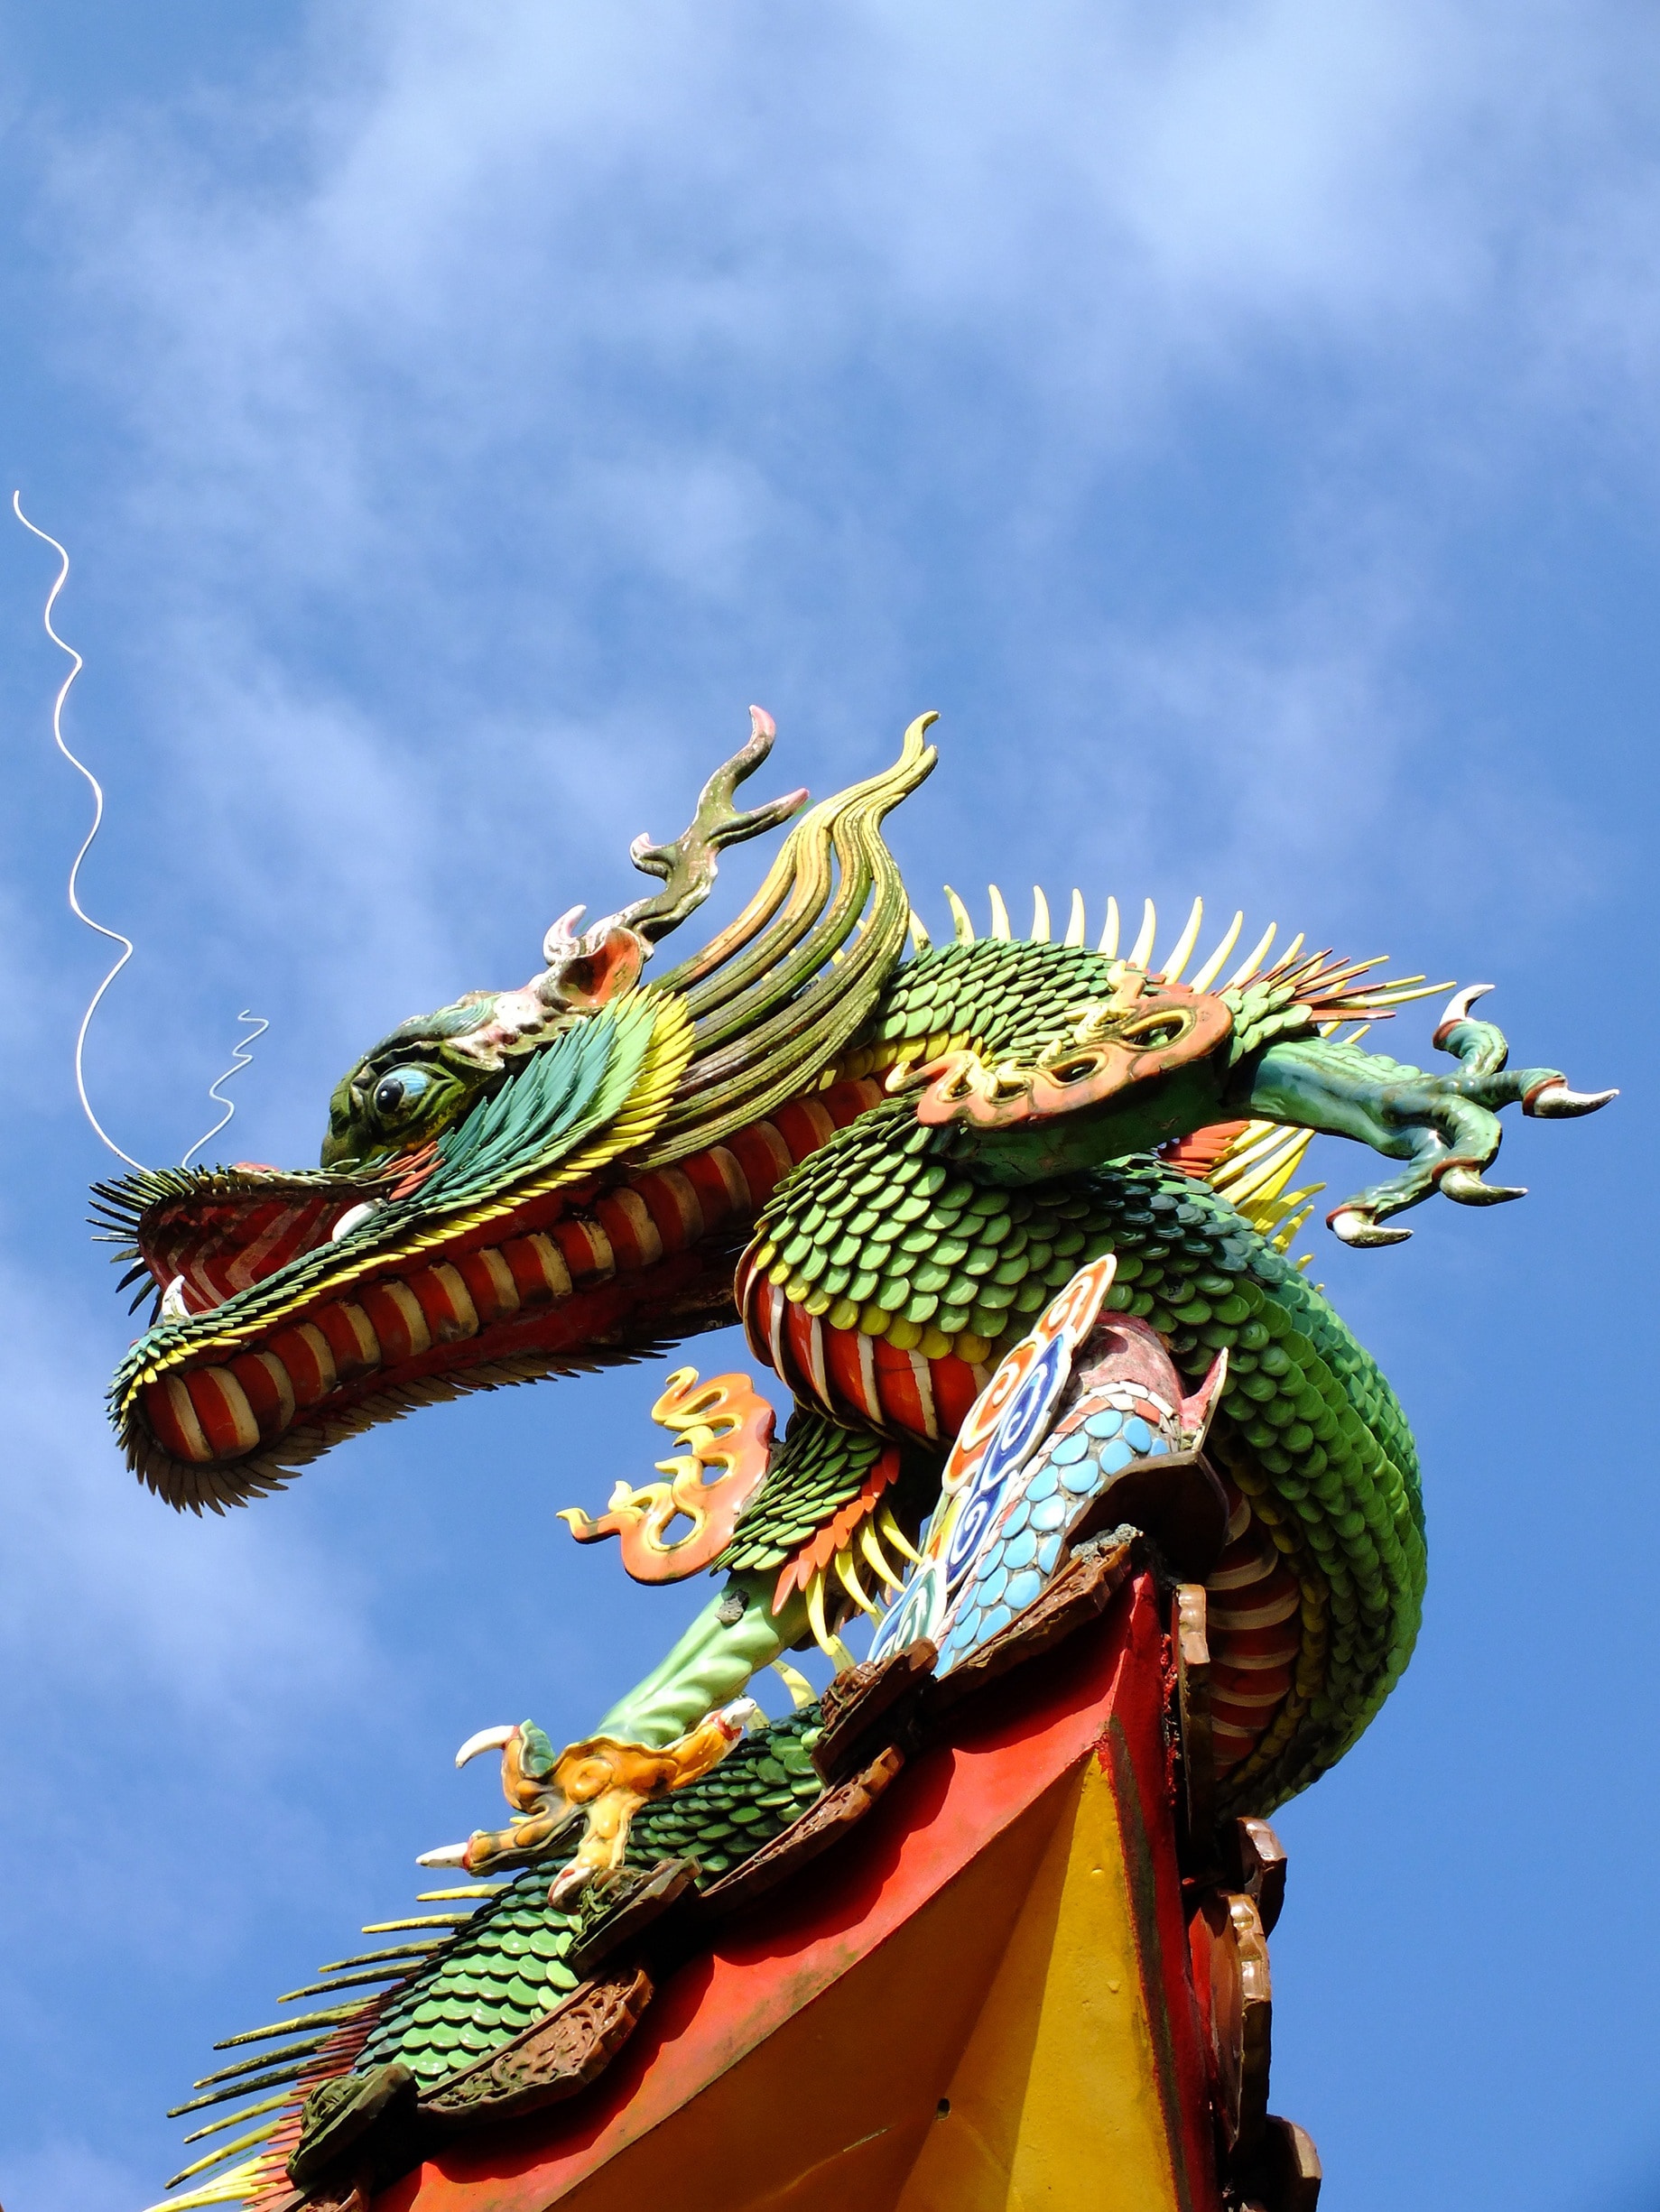 green orange and red dragon sculpture